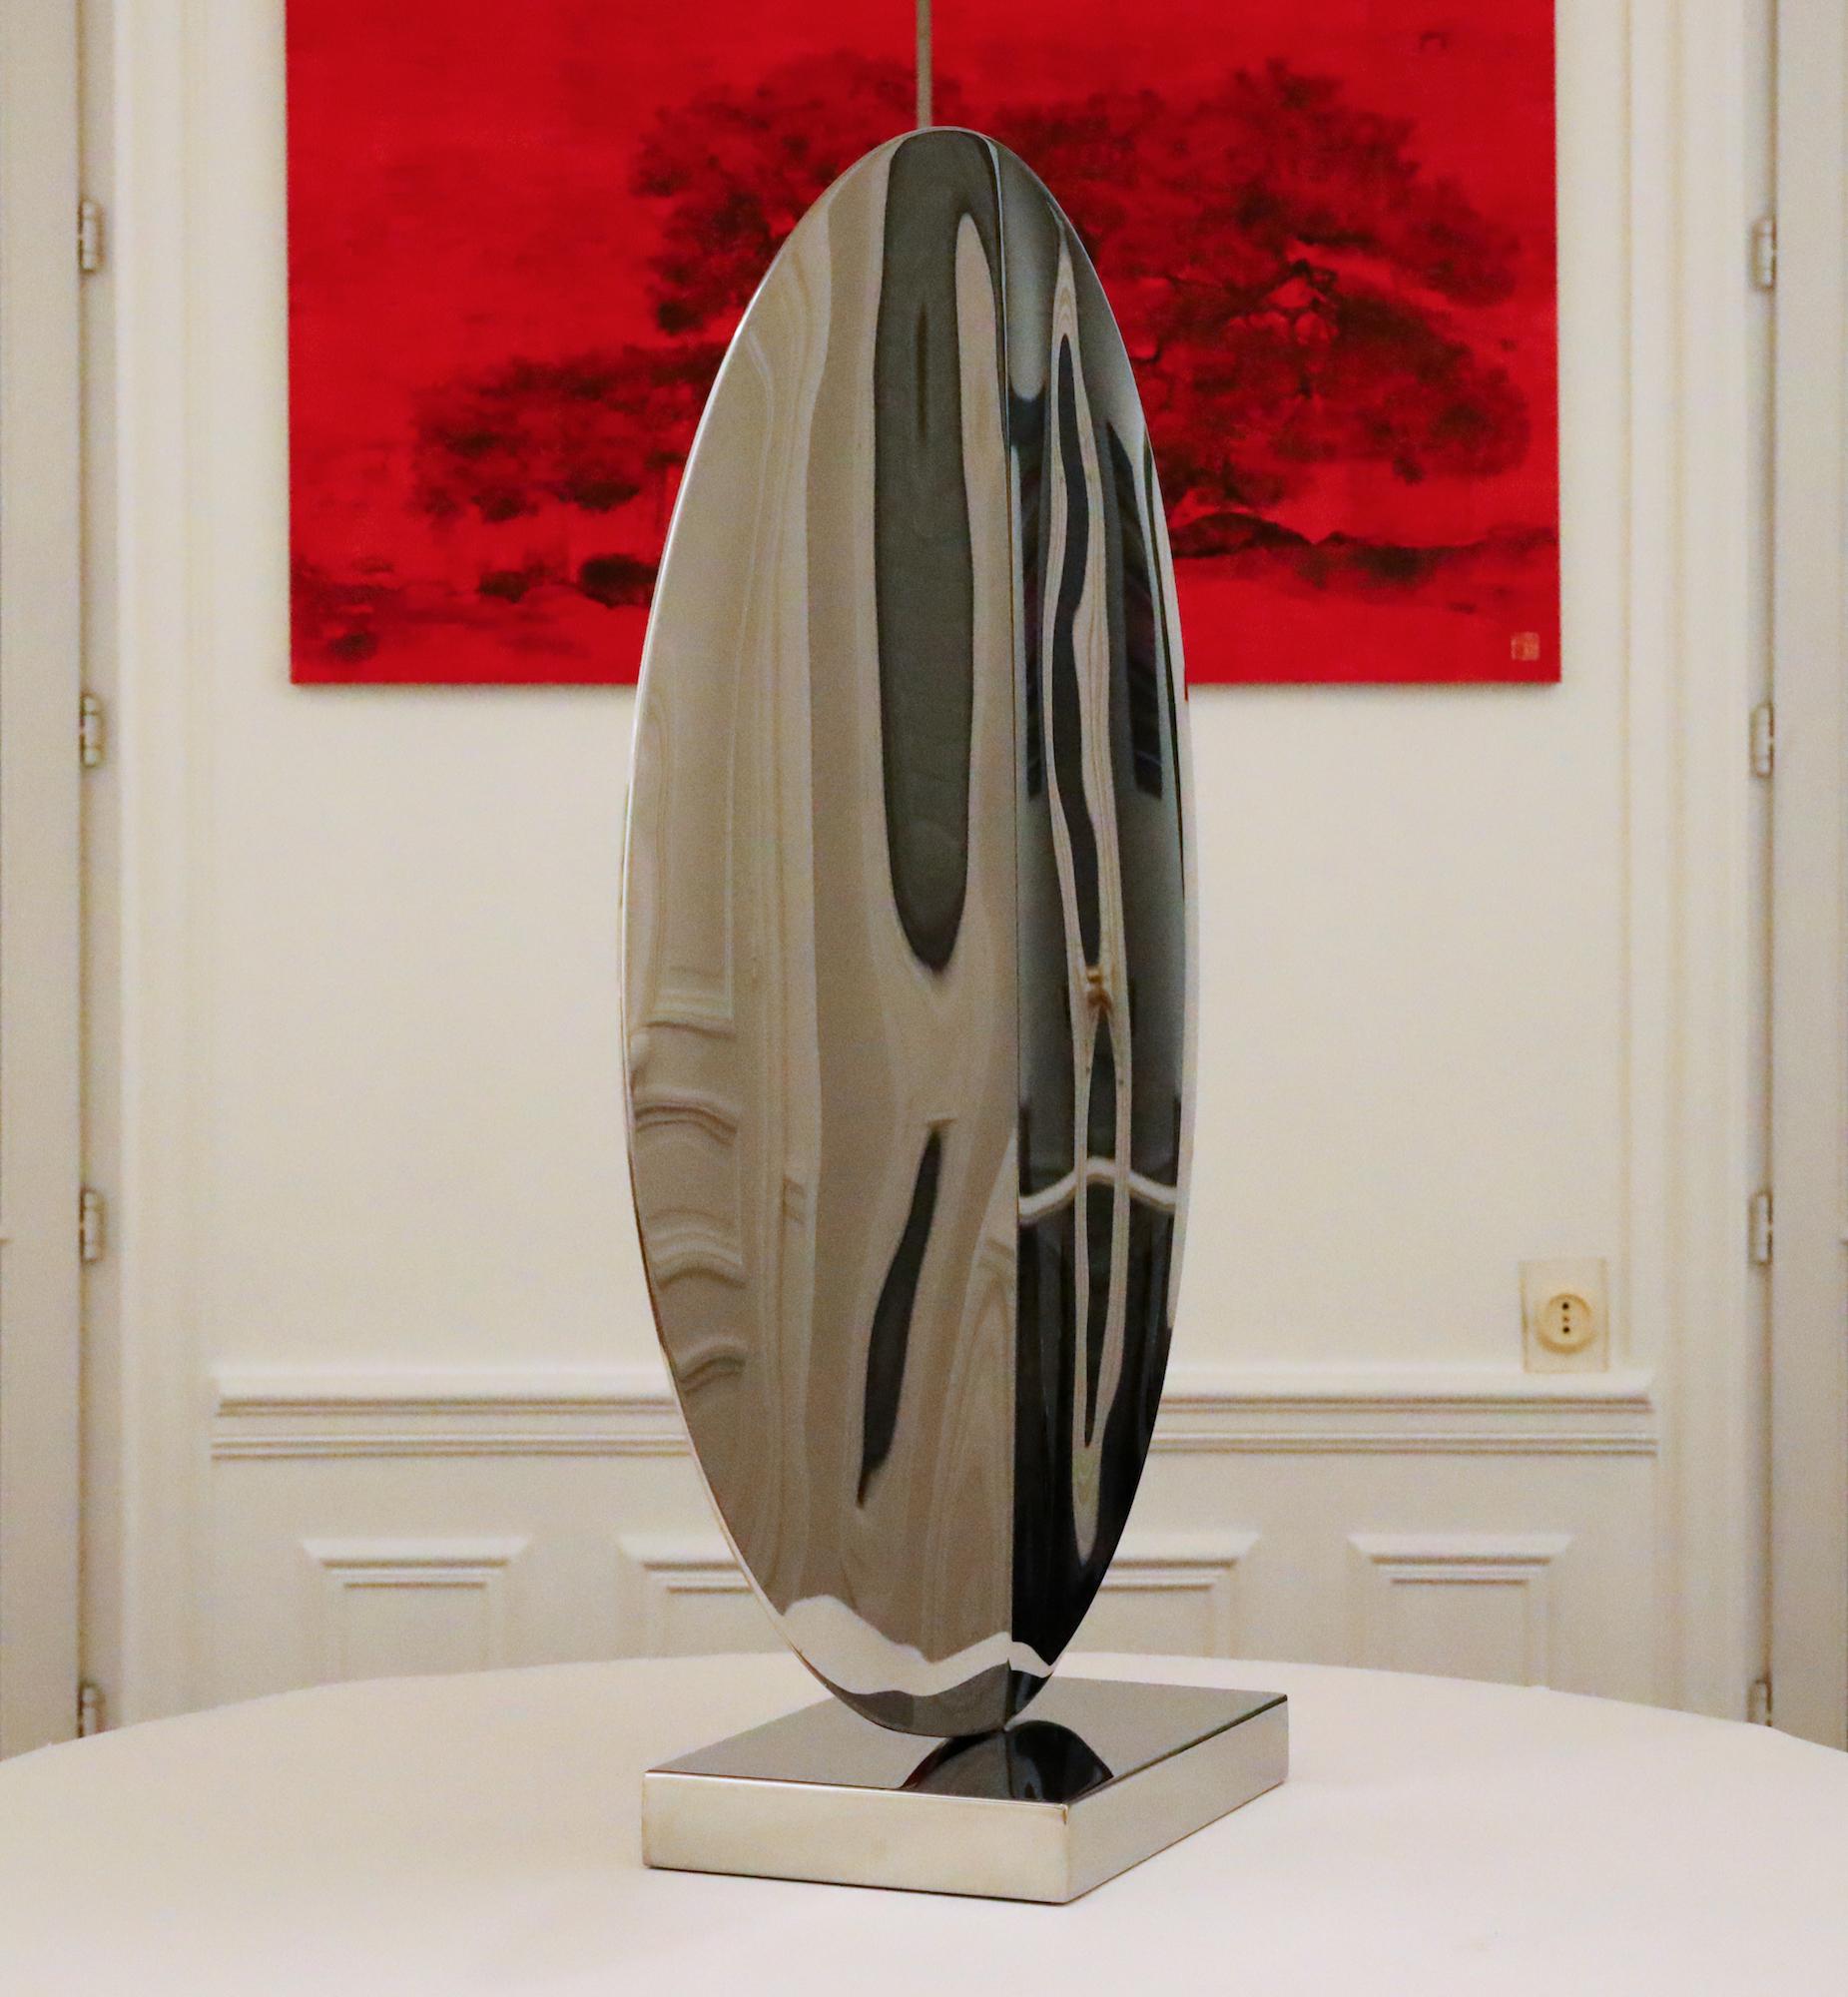 Mirror “with fold” I by Franck K - Stainless steel sculpture, reflection, light For Sale 2